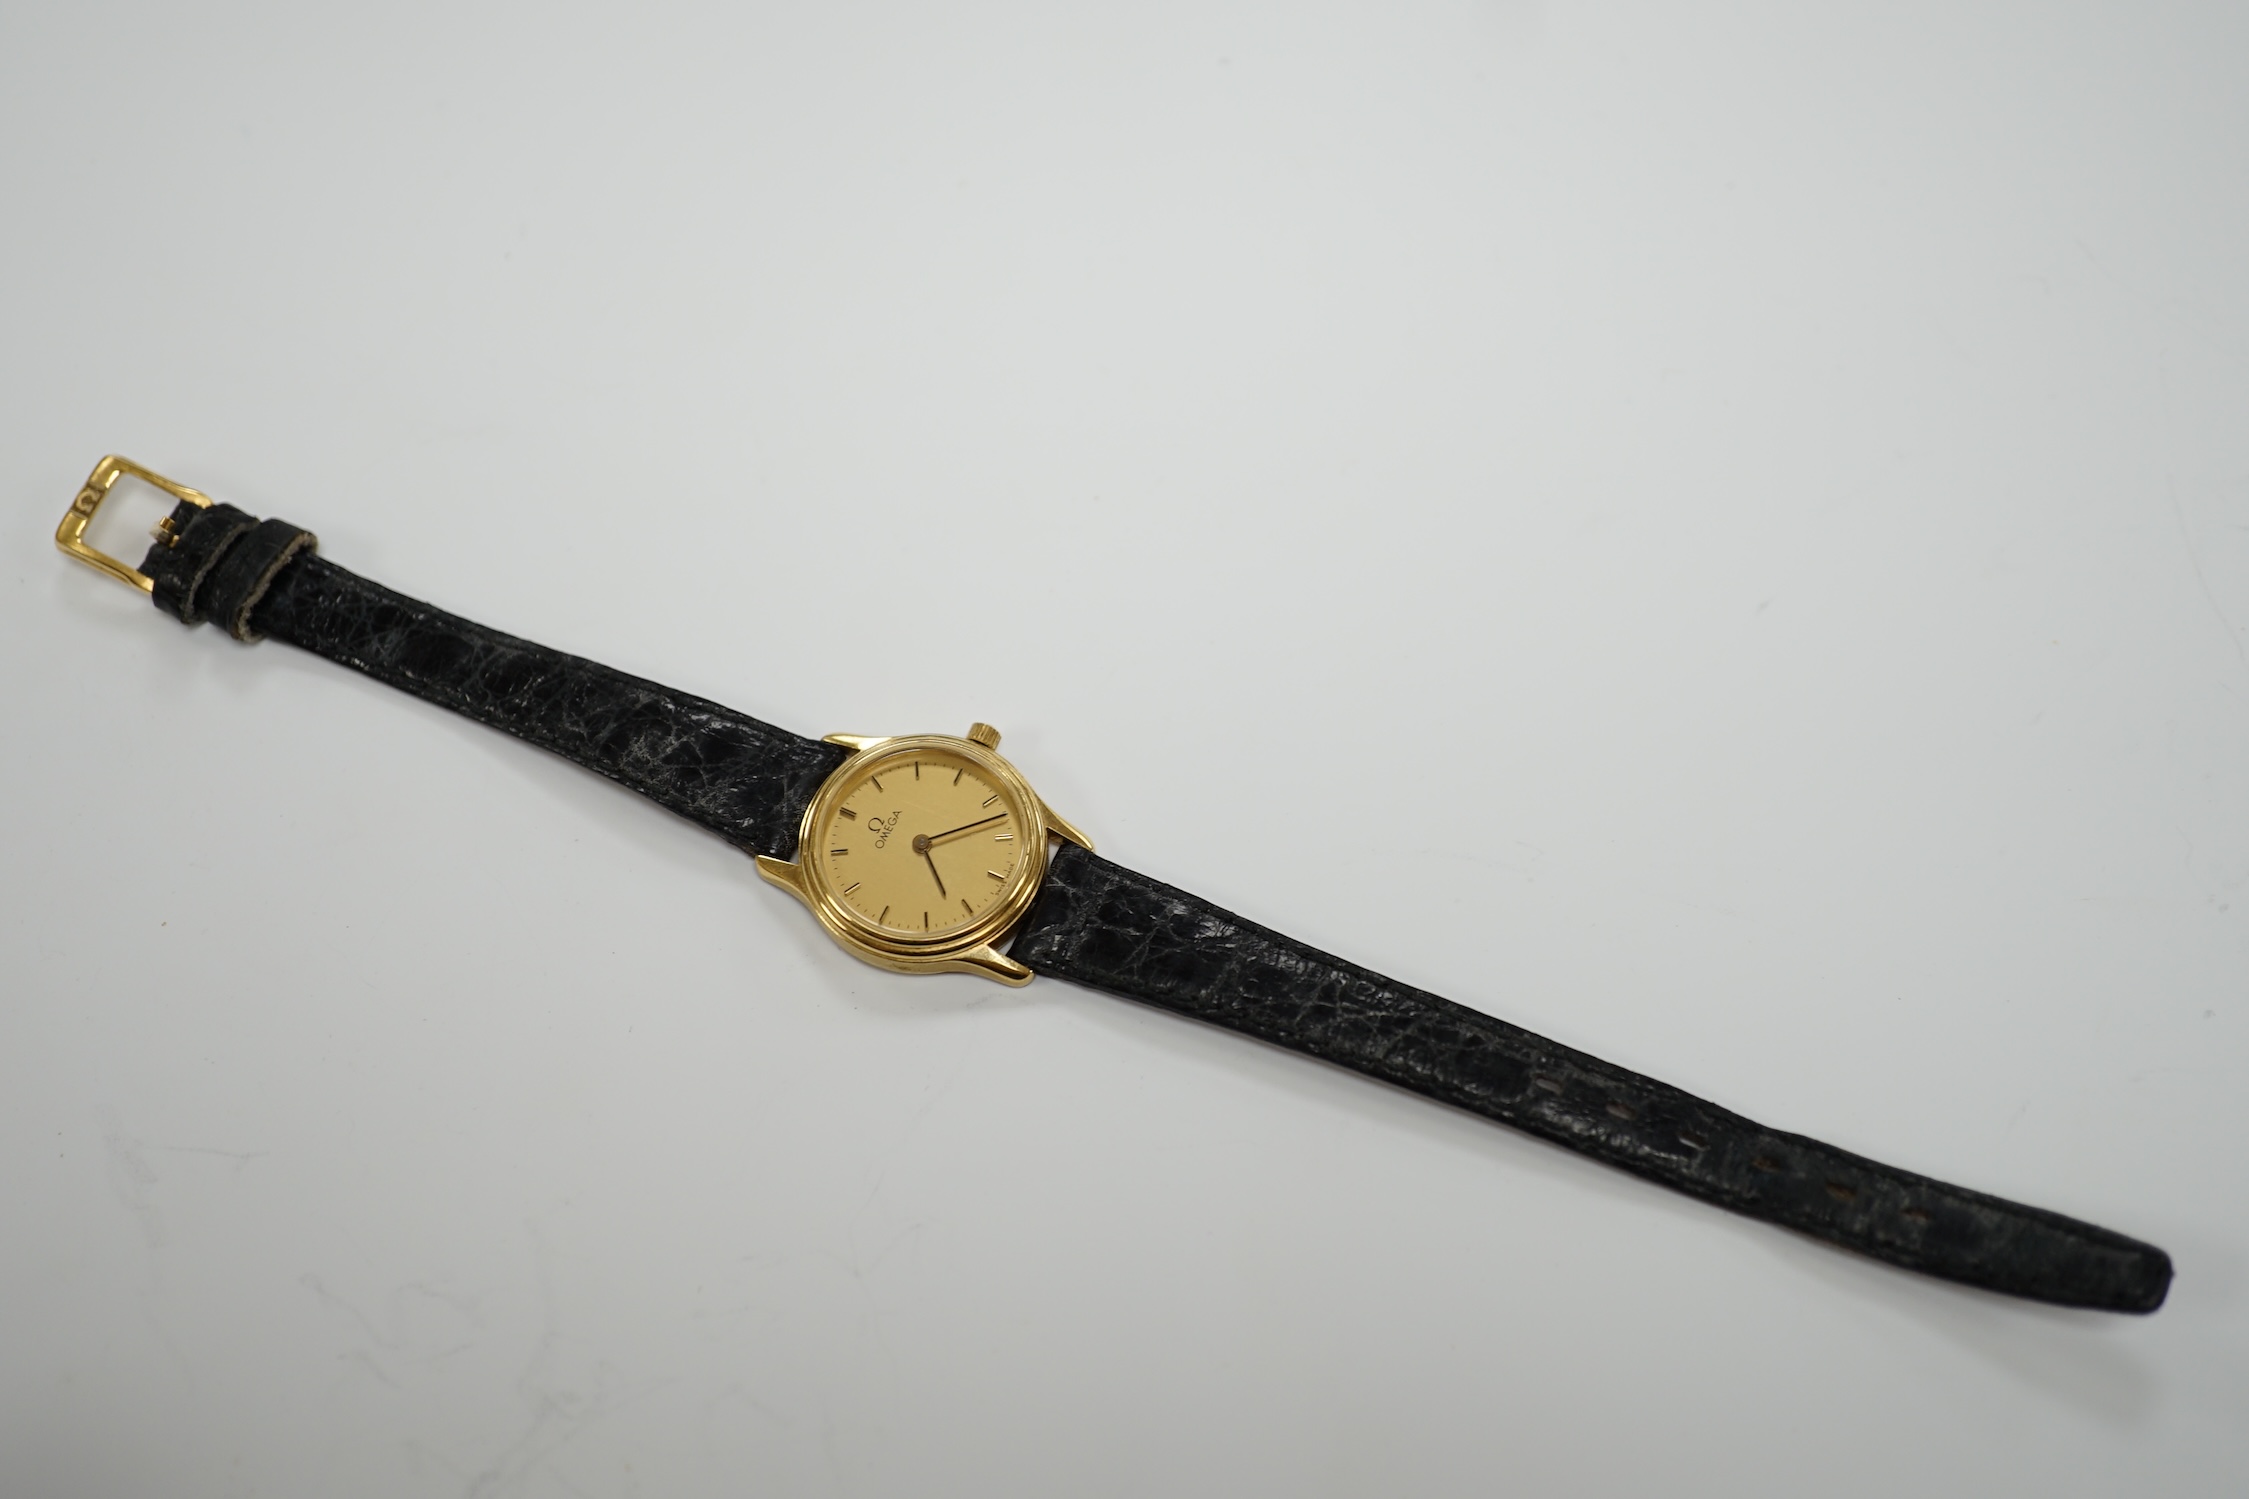 A lady's 18ct gold Omega quartz wrist watch, with case back inscription, on a leather strap with Omega buckle, with Omega box.